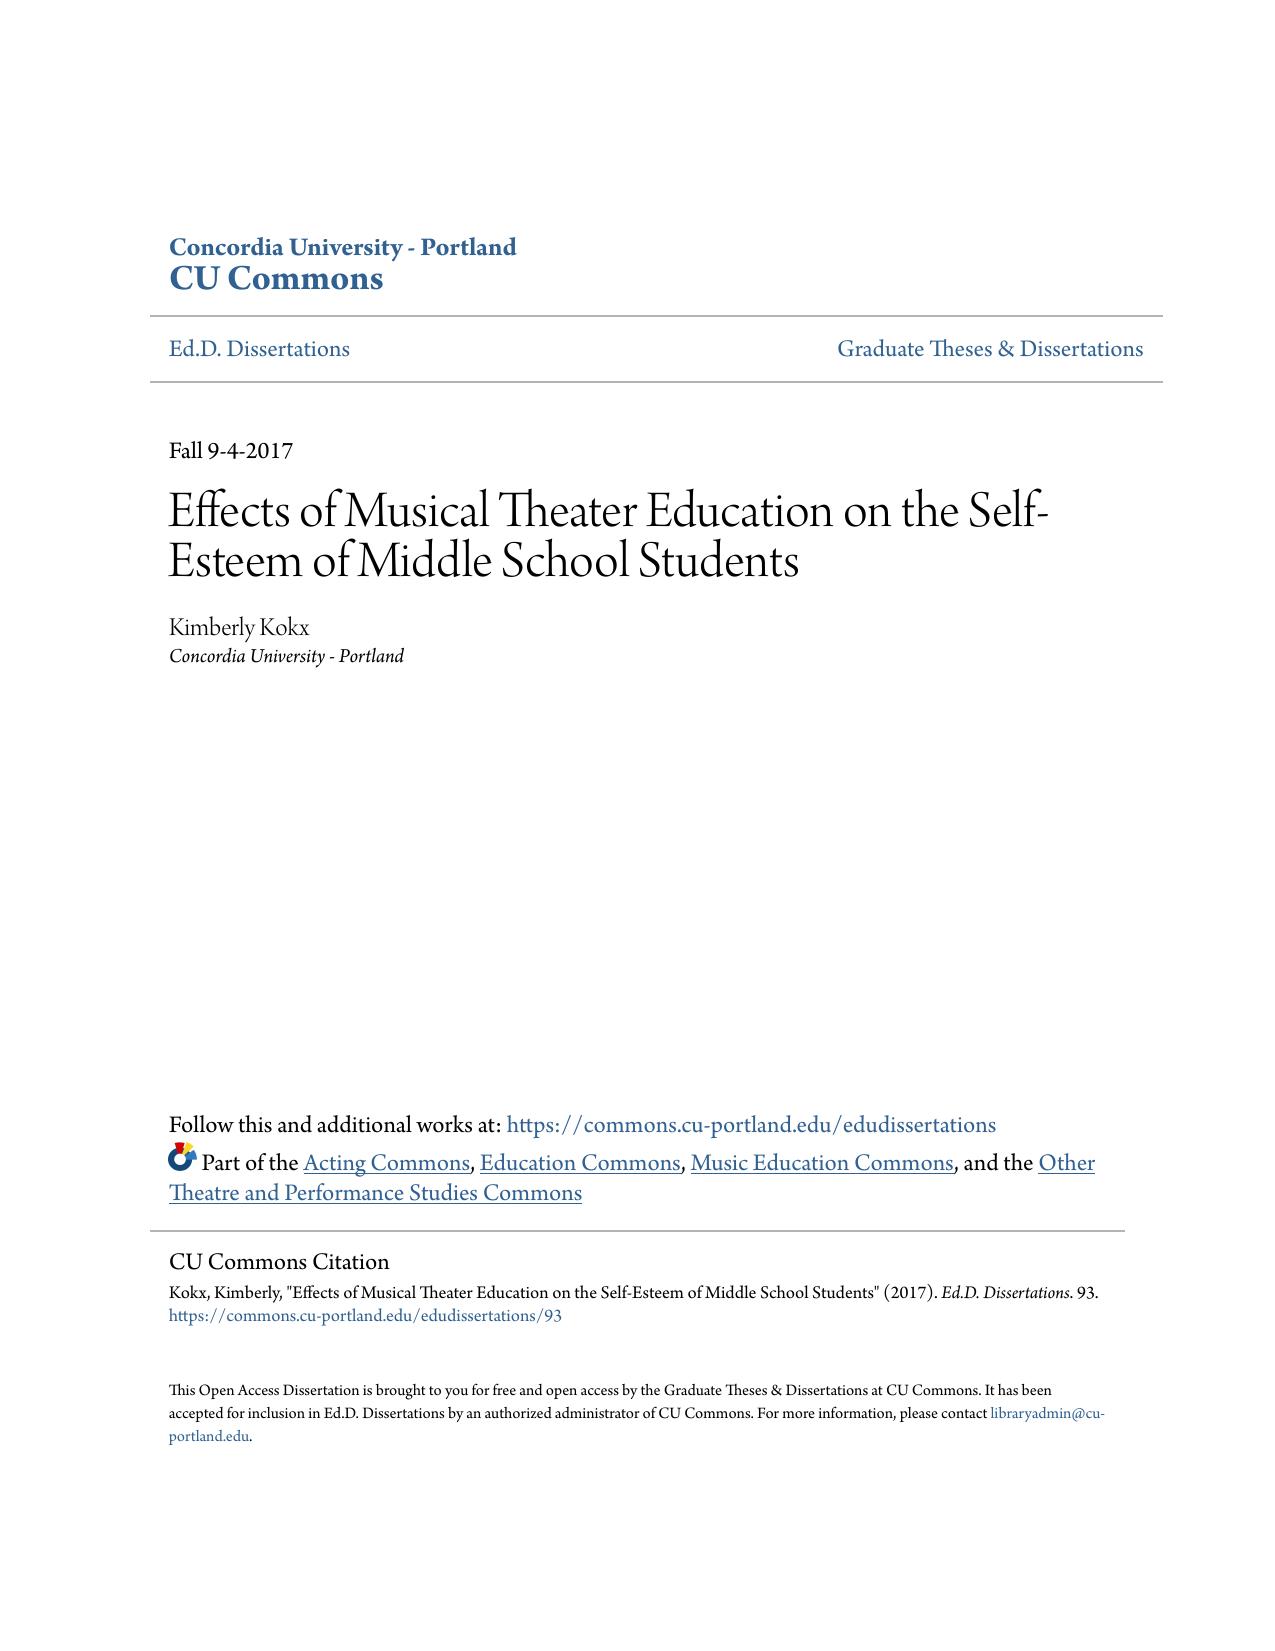 Effects of Musical Theater Education on the Self-Esteem of Middle School Students